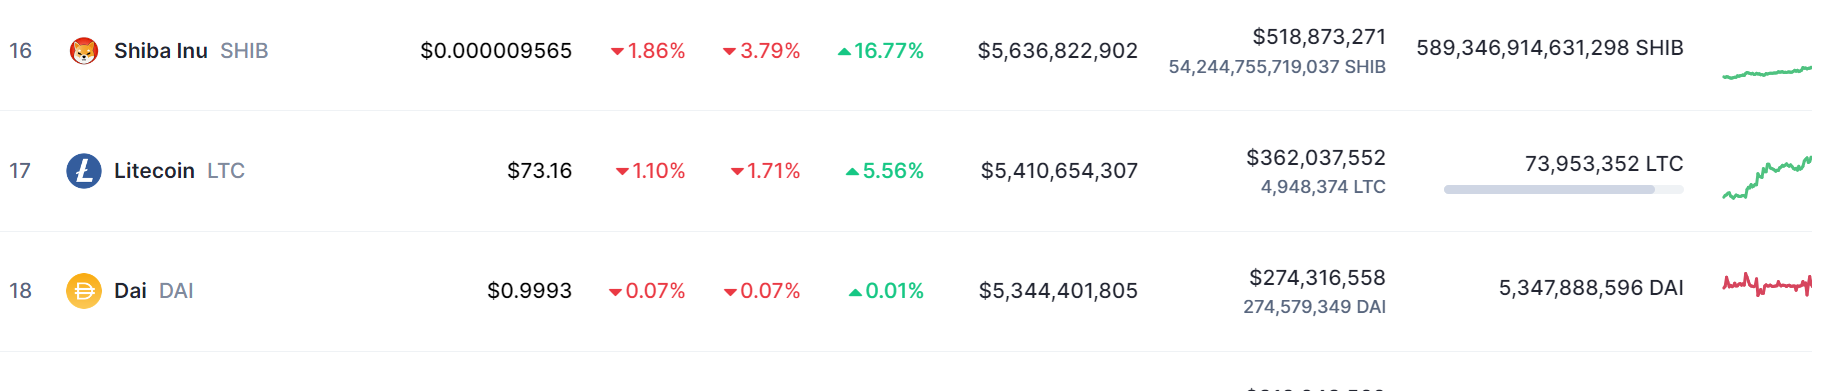 Shiba Inu Surges, Overtakes LTC and DAI as 16th Largest Crypto